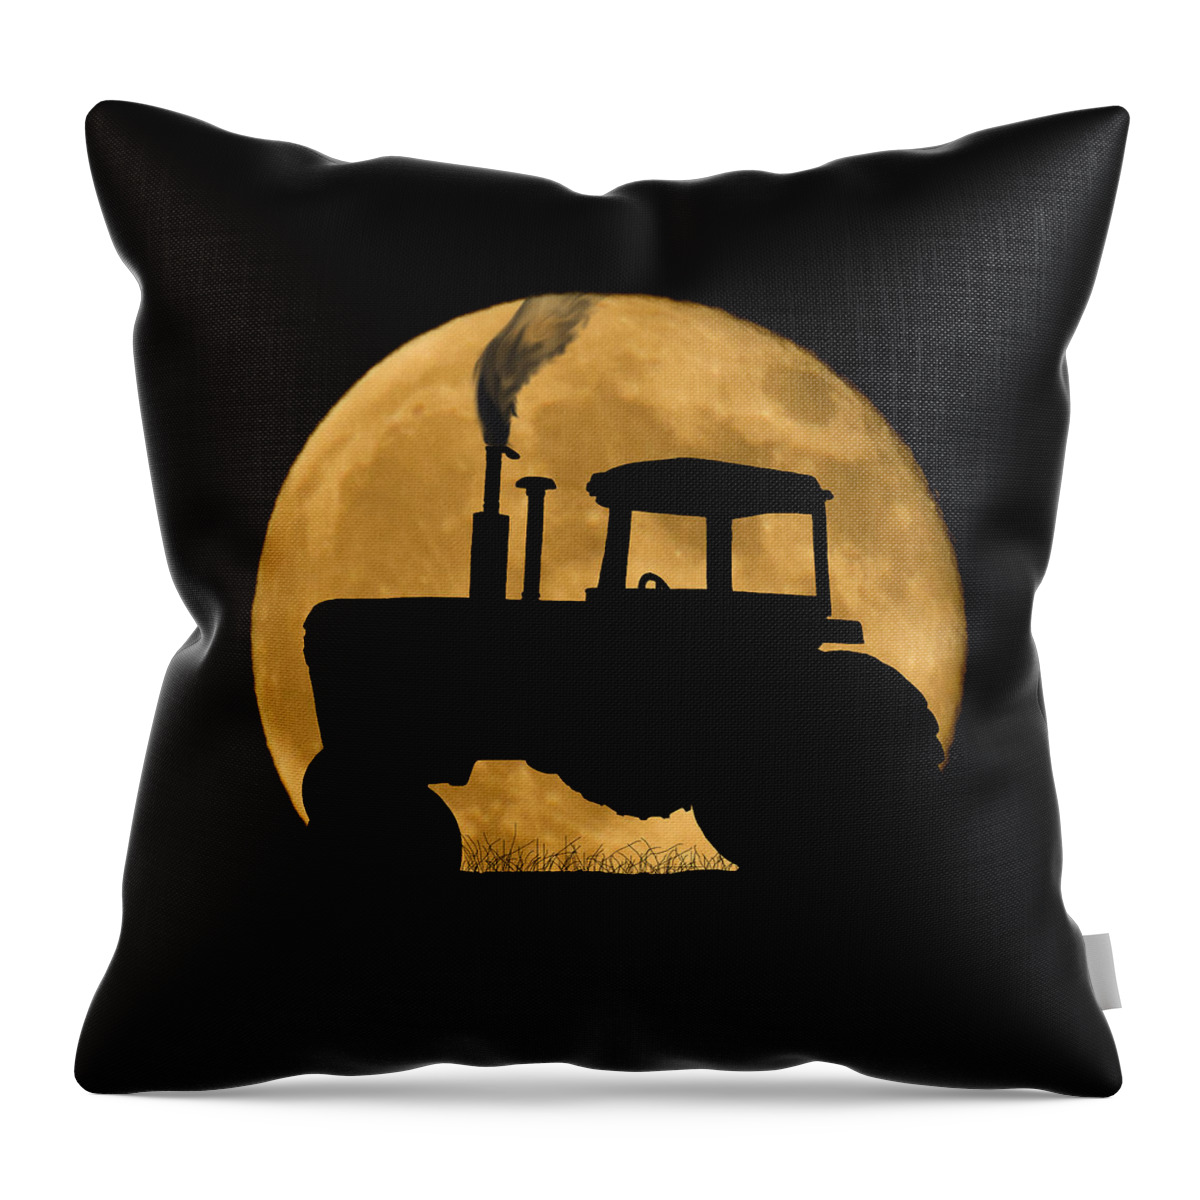 Harvest Moon Throw Pillow featuring the photograph Harvest Moon by Shane Bechler